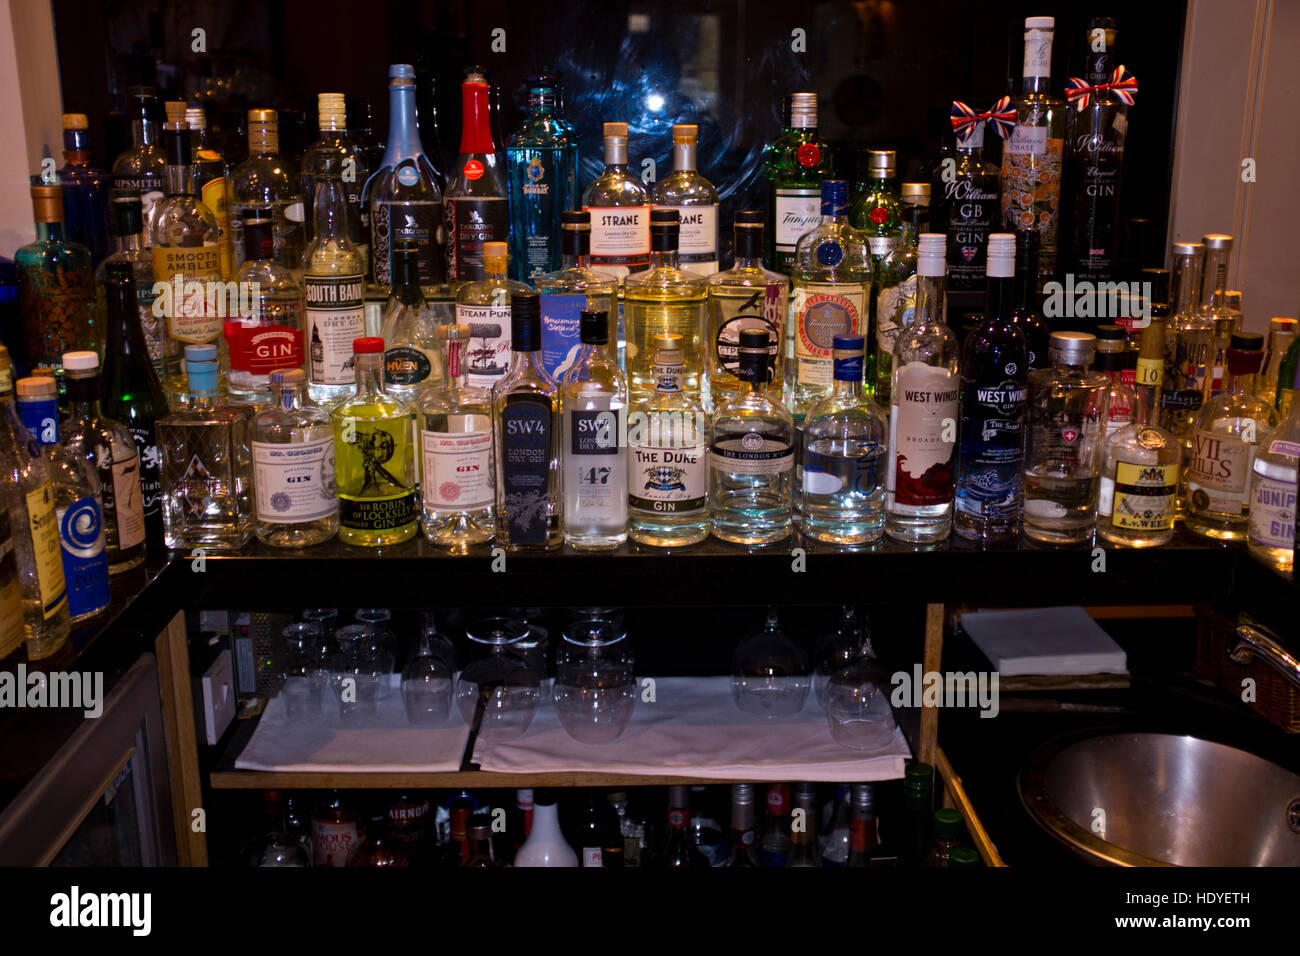 Gin Martini Heaven,600 collection of different Gins,'Mothers Ruin'they say,The Feathers Hotel and Bar,Woodstock,Oxfordshire,UK Stock Photo